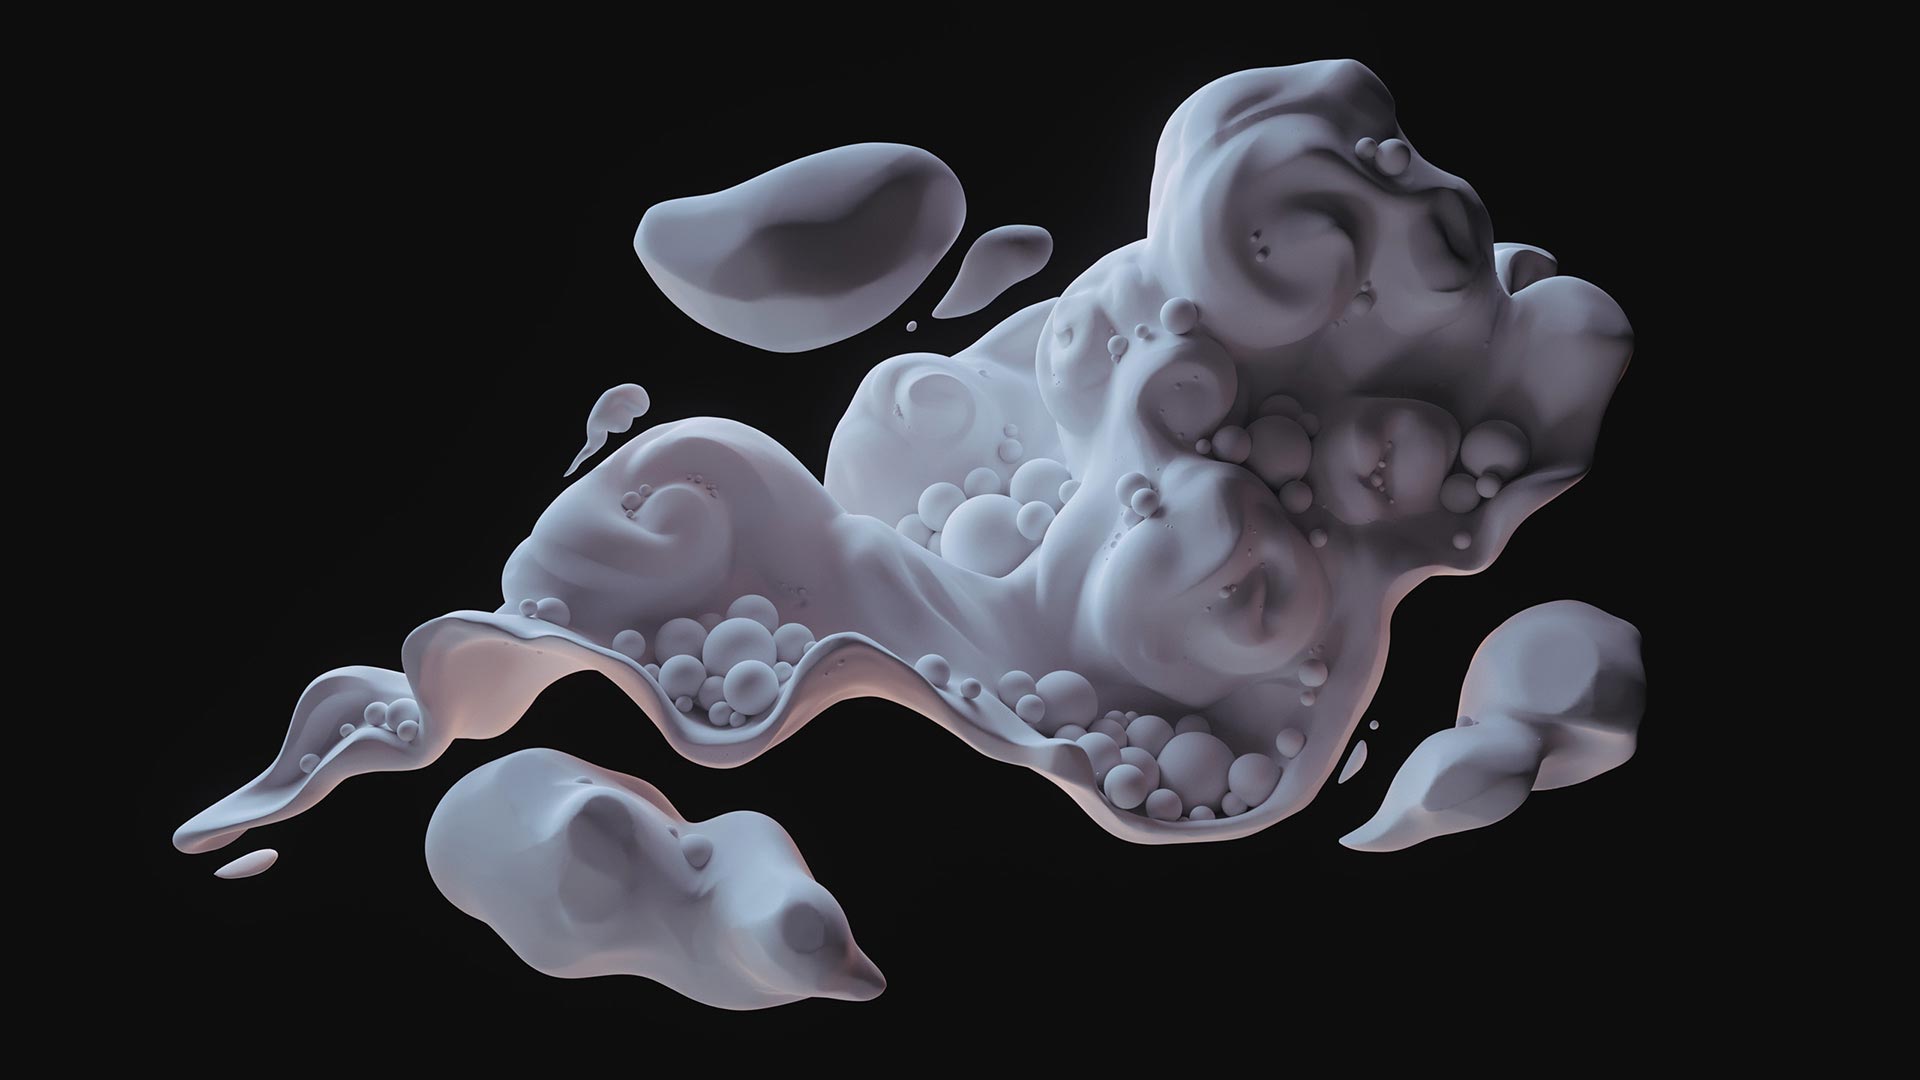 Clay render of a 3D sculpture: clustered spheres (representing black holes) cradled in the crevices of cloud-like forms.